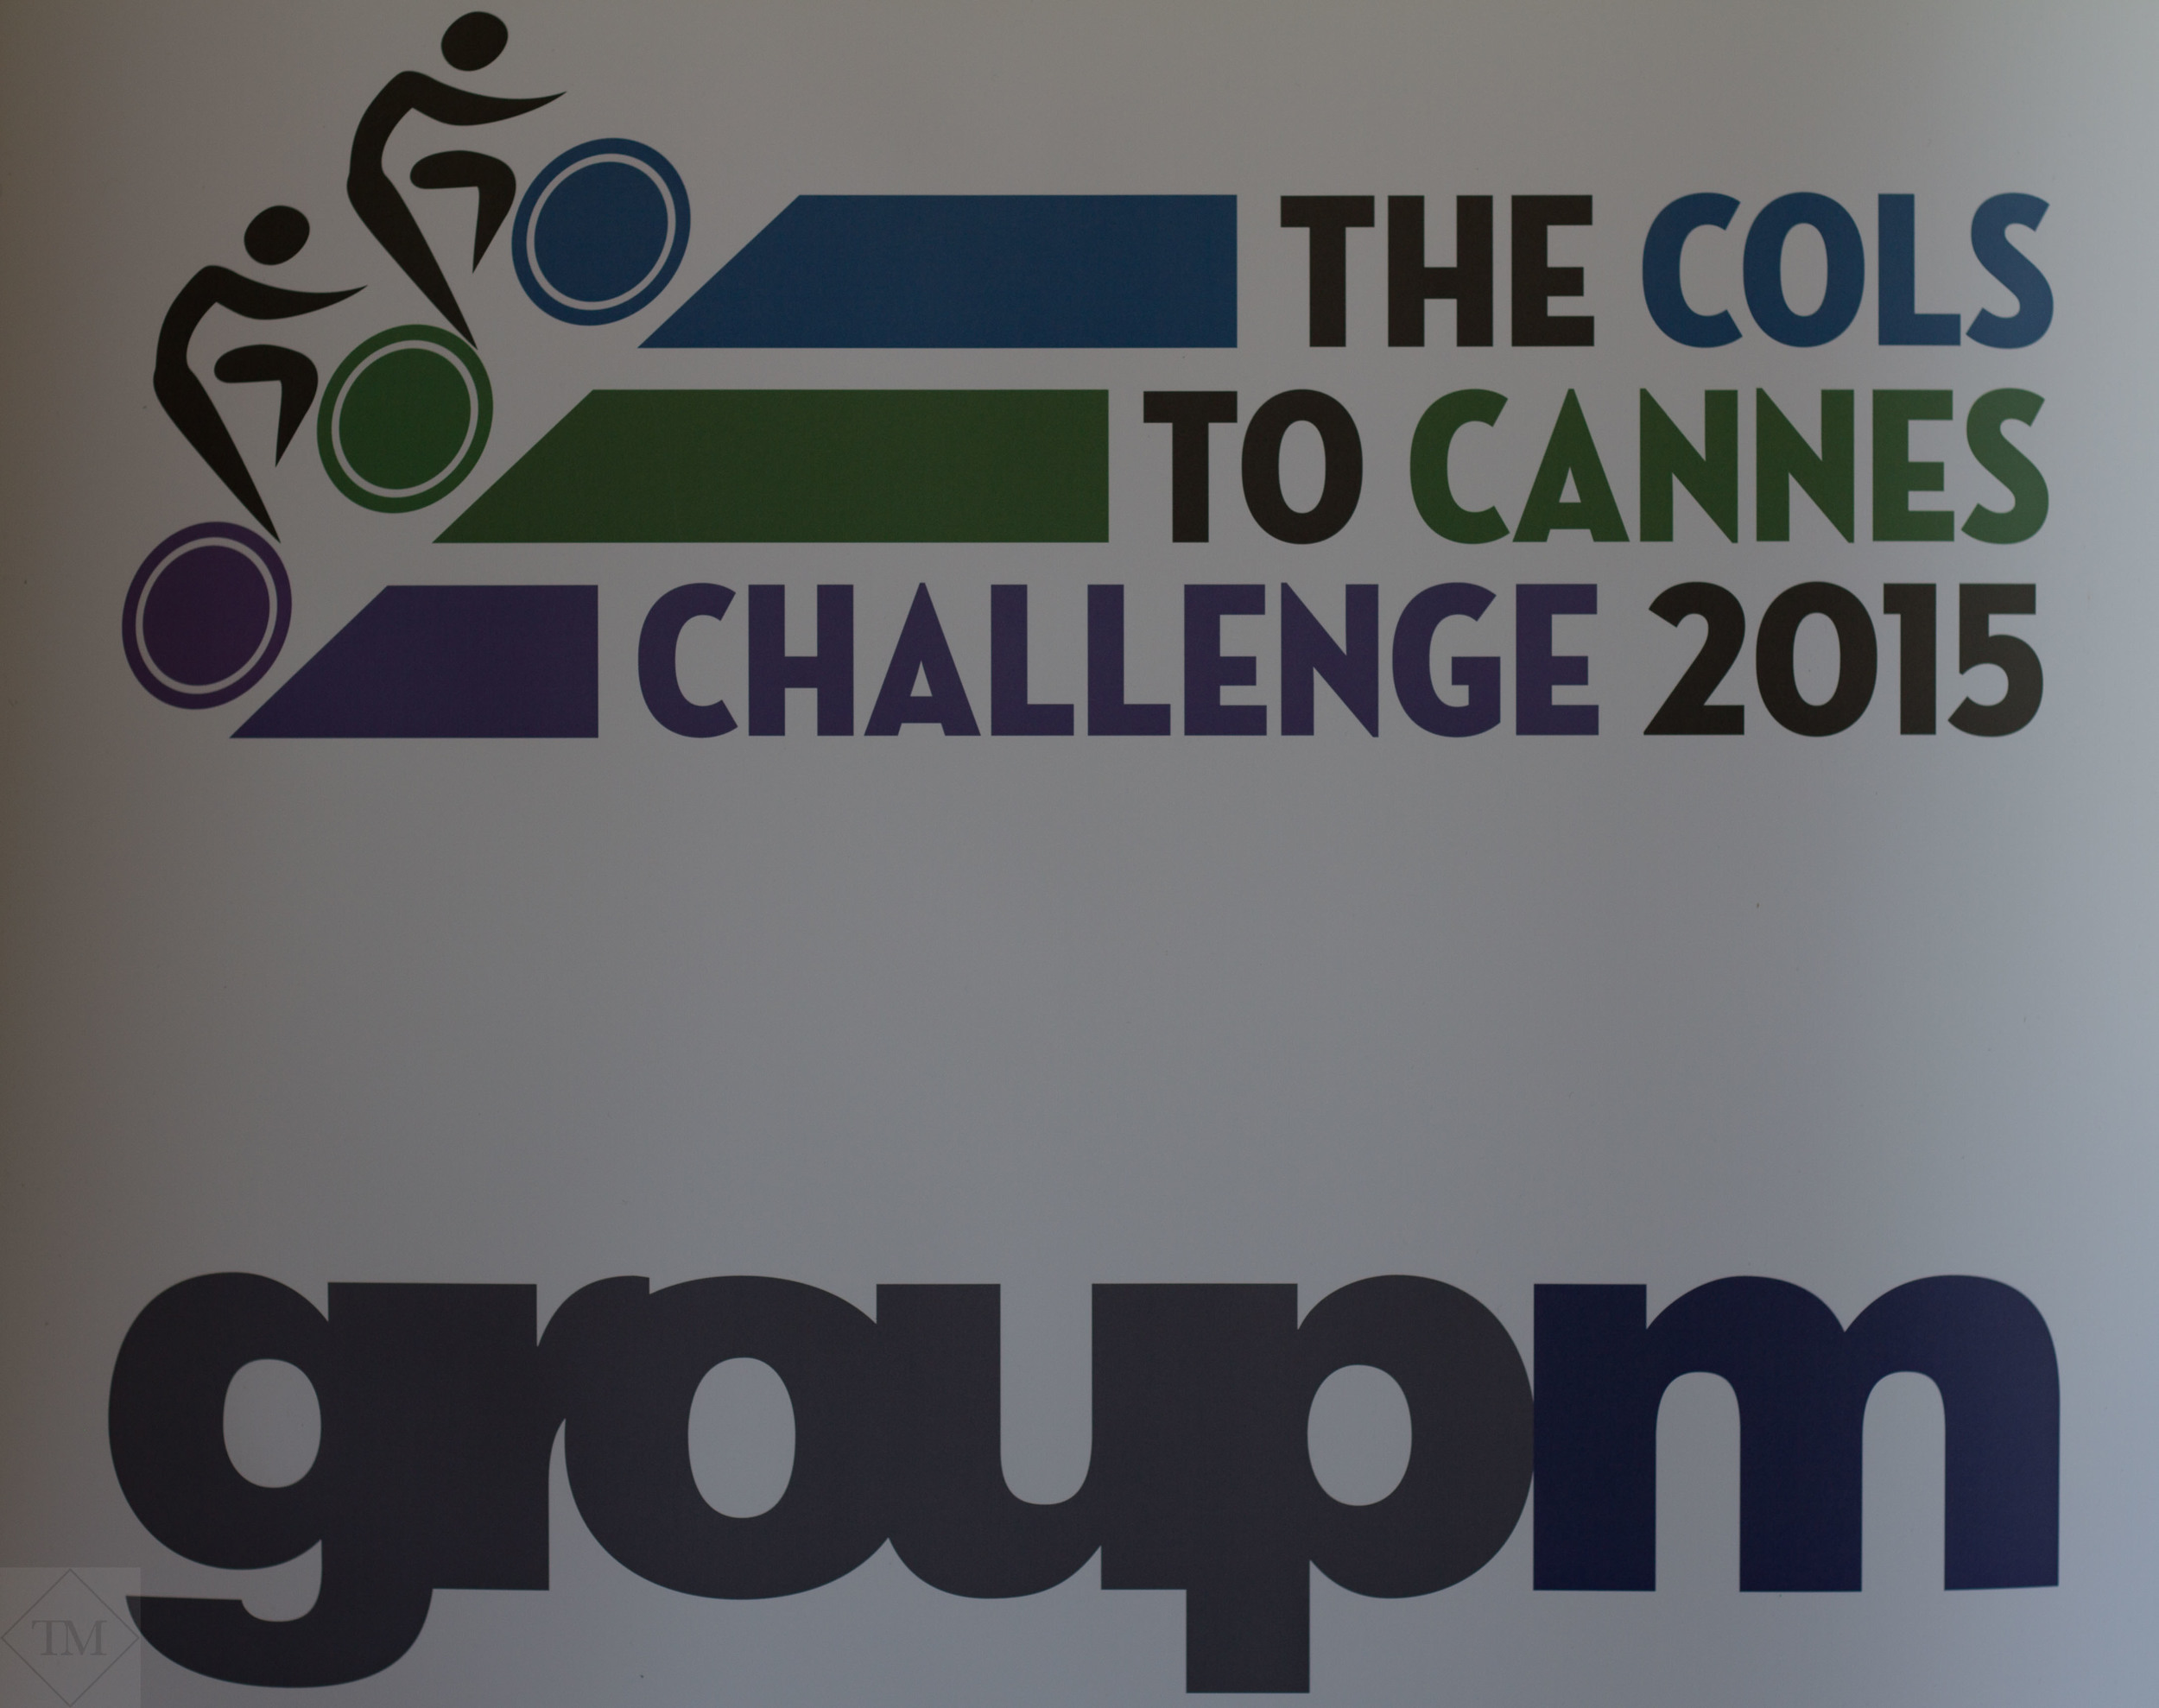 GroupM UK, CANCER RESEARCH UK, Cols to Cannes Challenge